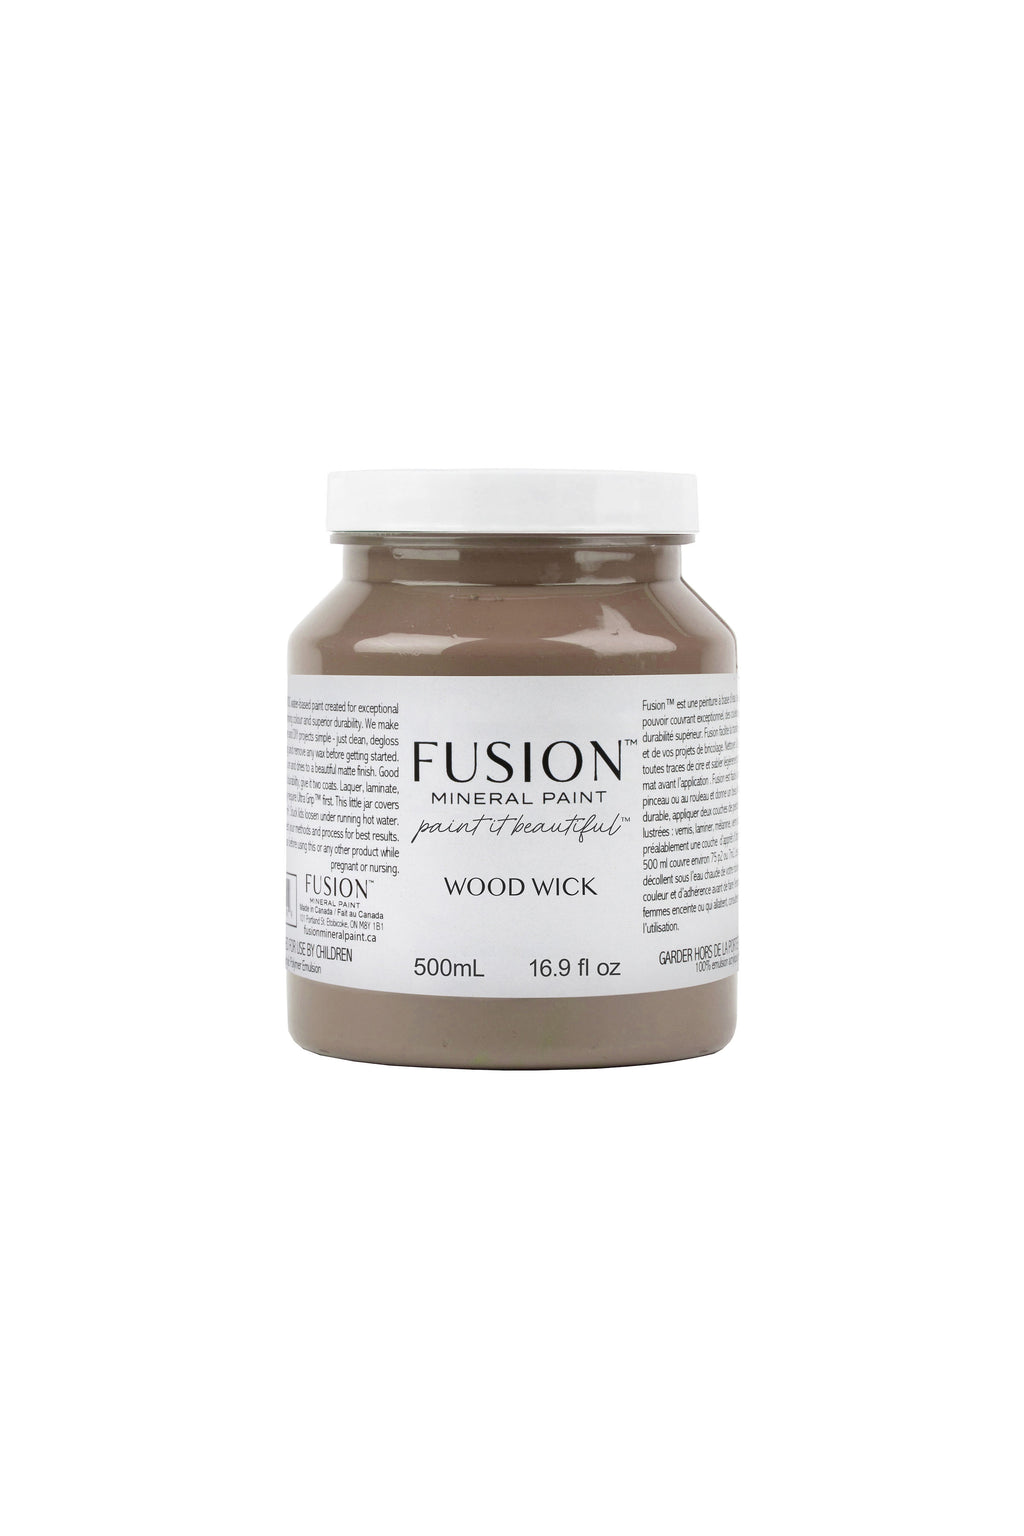 Woodwick Fusion Mineral Paint - Pint